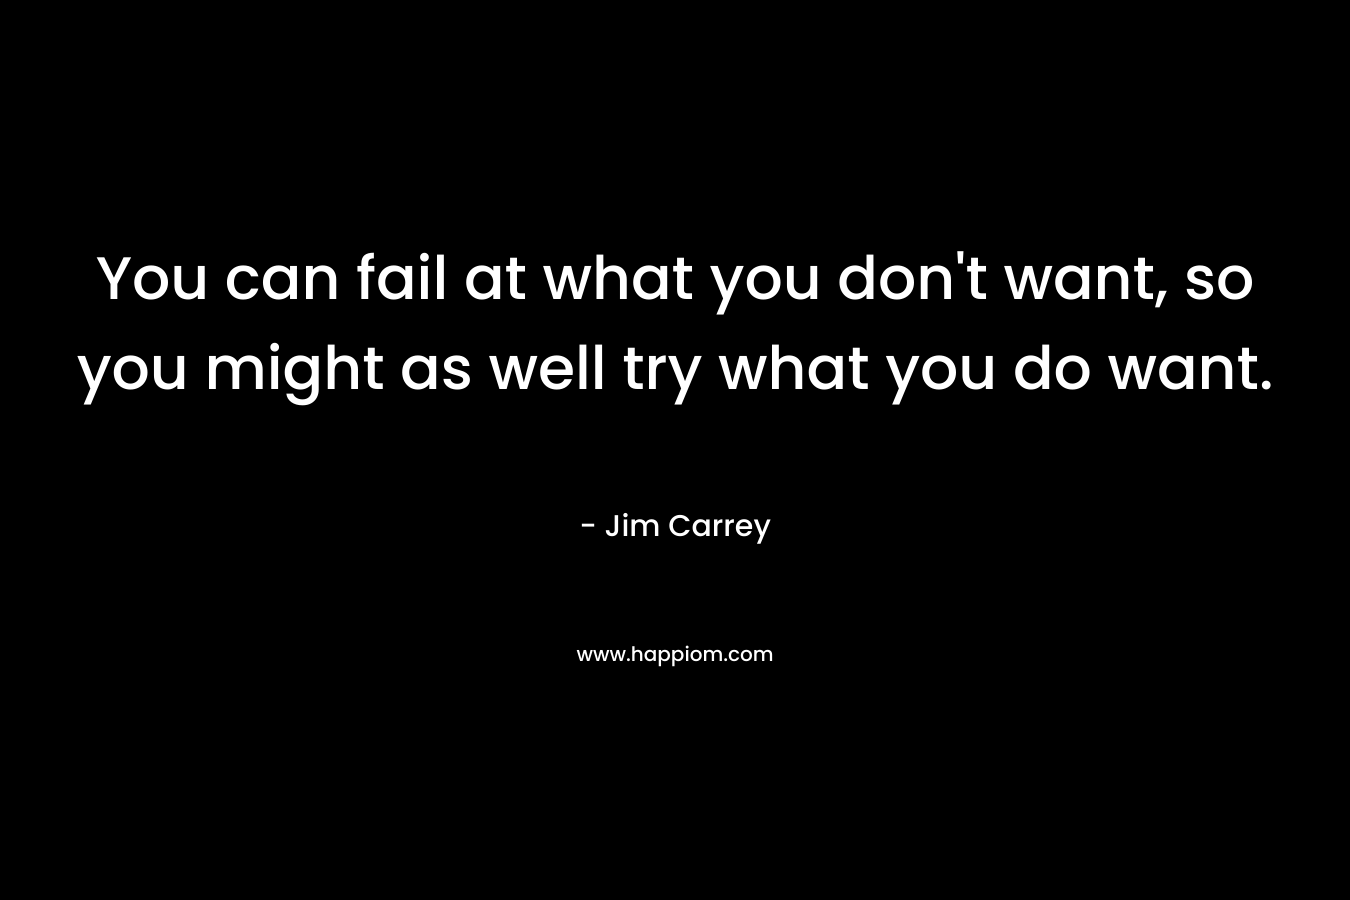 You can fail at what you don’t want, so you might as well try what you do want. – Jim Carrey